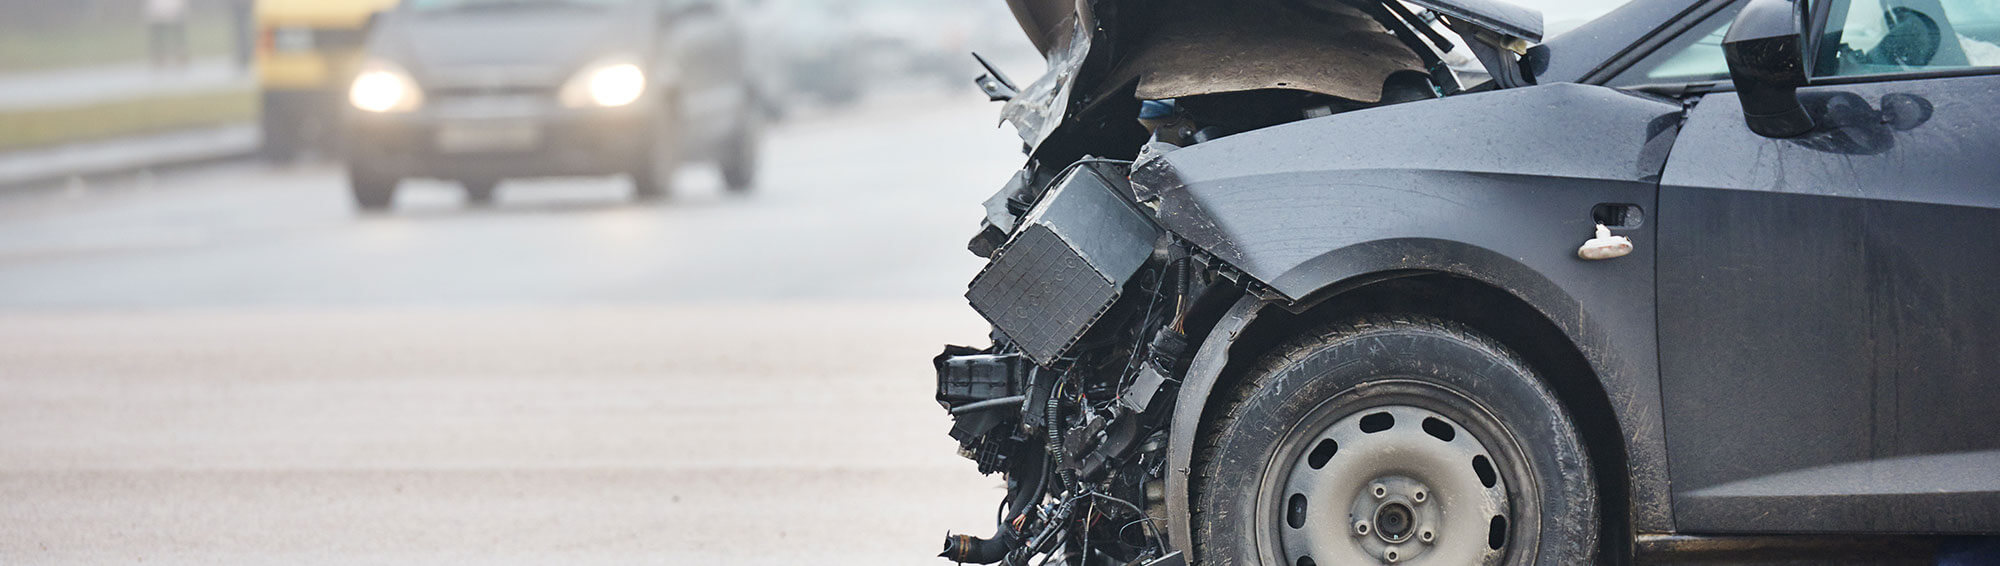 3 Reasons to Act Right Away After an Auto Accident